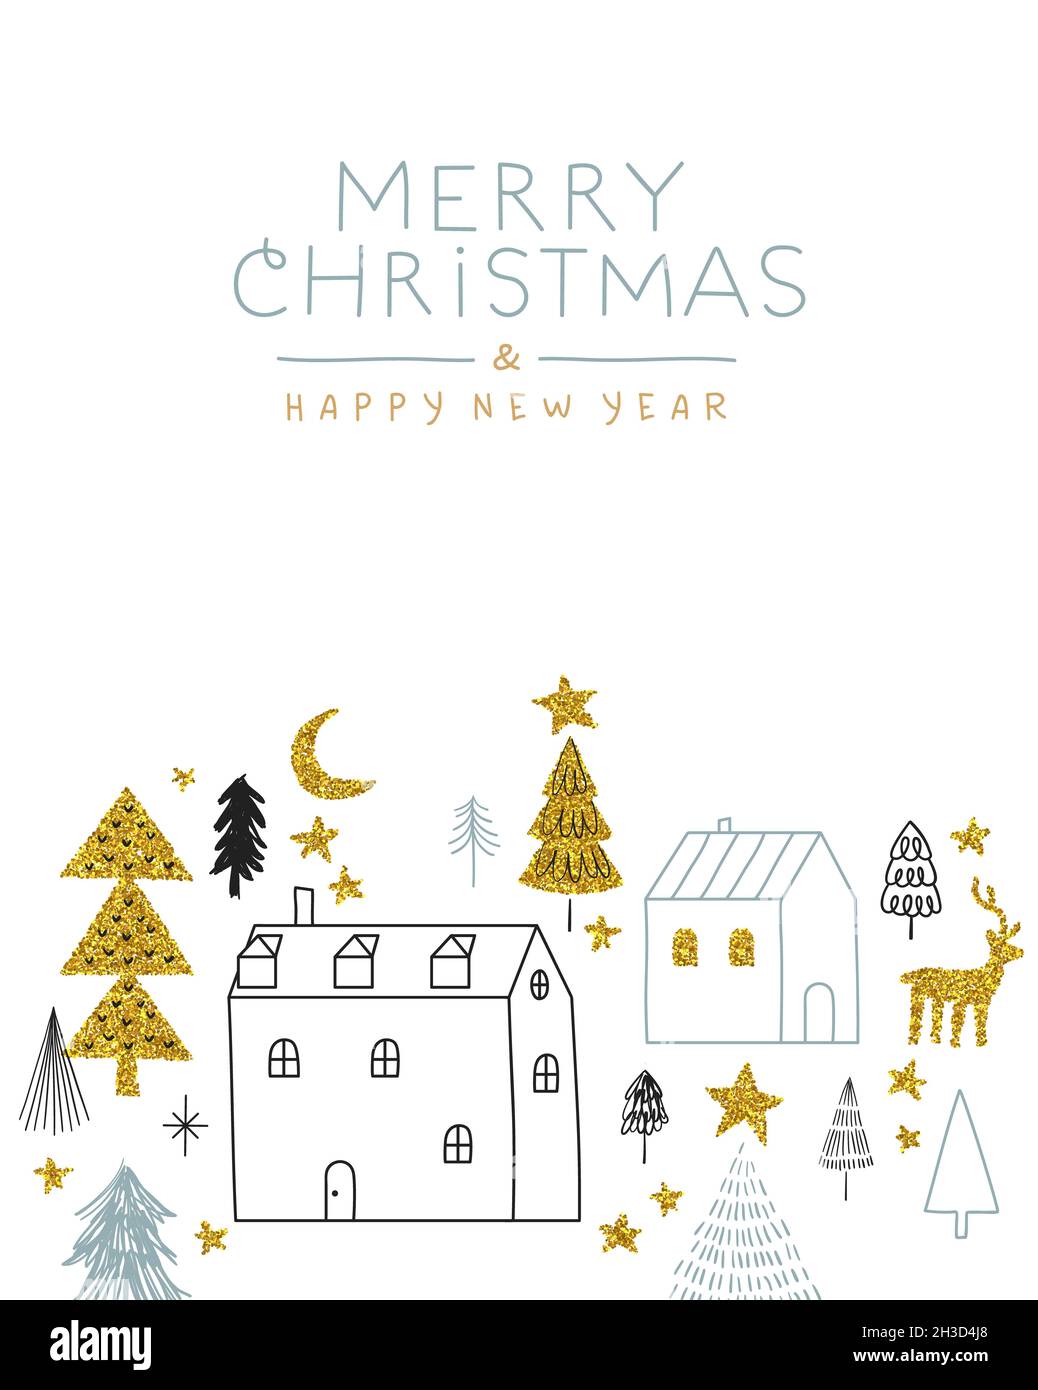 Merry Christmas Happy New Year greeting card illustration of gold glitter pine tree village with reindeer. Cute nordic style cartoon for party invitat Stock Photo